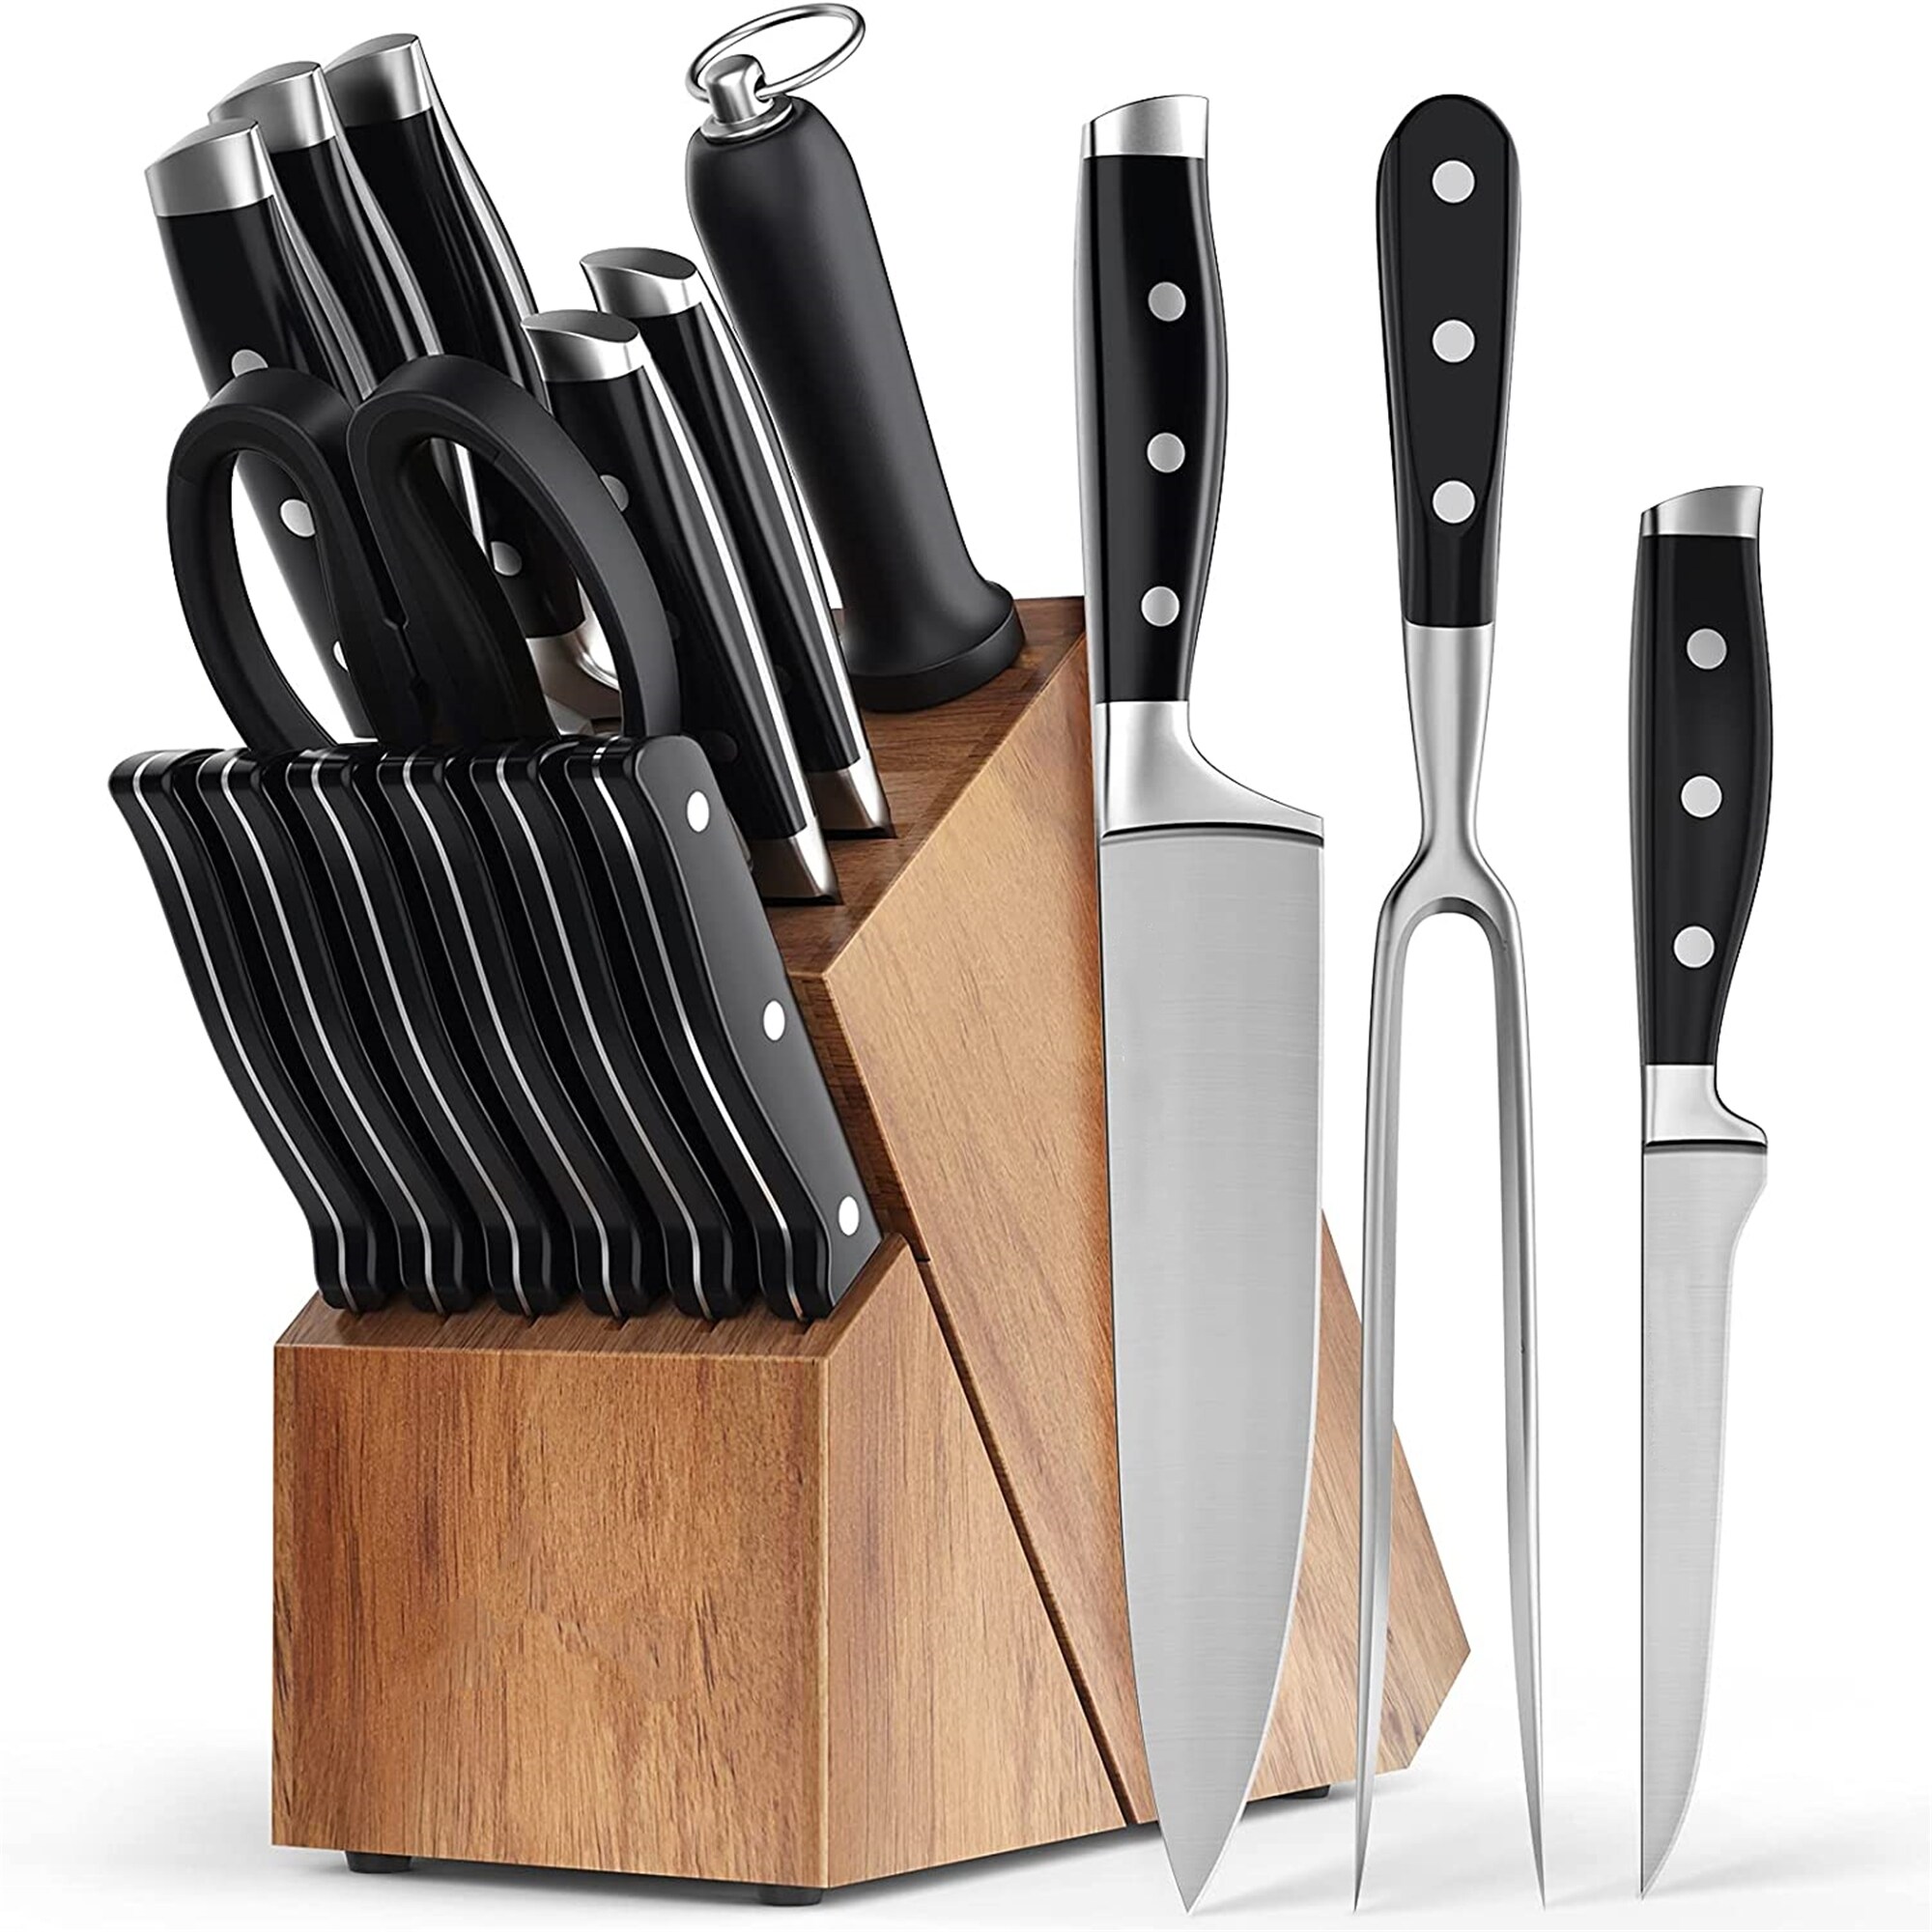 https://ak1.ostkcdn.com/images/products/is/images/direct/ed5b9c988536ee86551cd56e846fa9d3d063719c/Knife-Sets-for-Kitchen-with-Block%2C-17-Pcs-with-Boning-Knife-and-Carving-Fork%2Cwith-German-Stainless-Steel-and-Full-Tang-Design.jpg